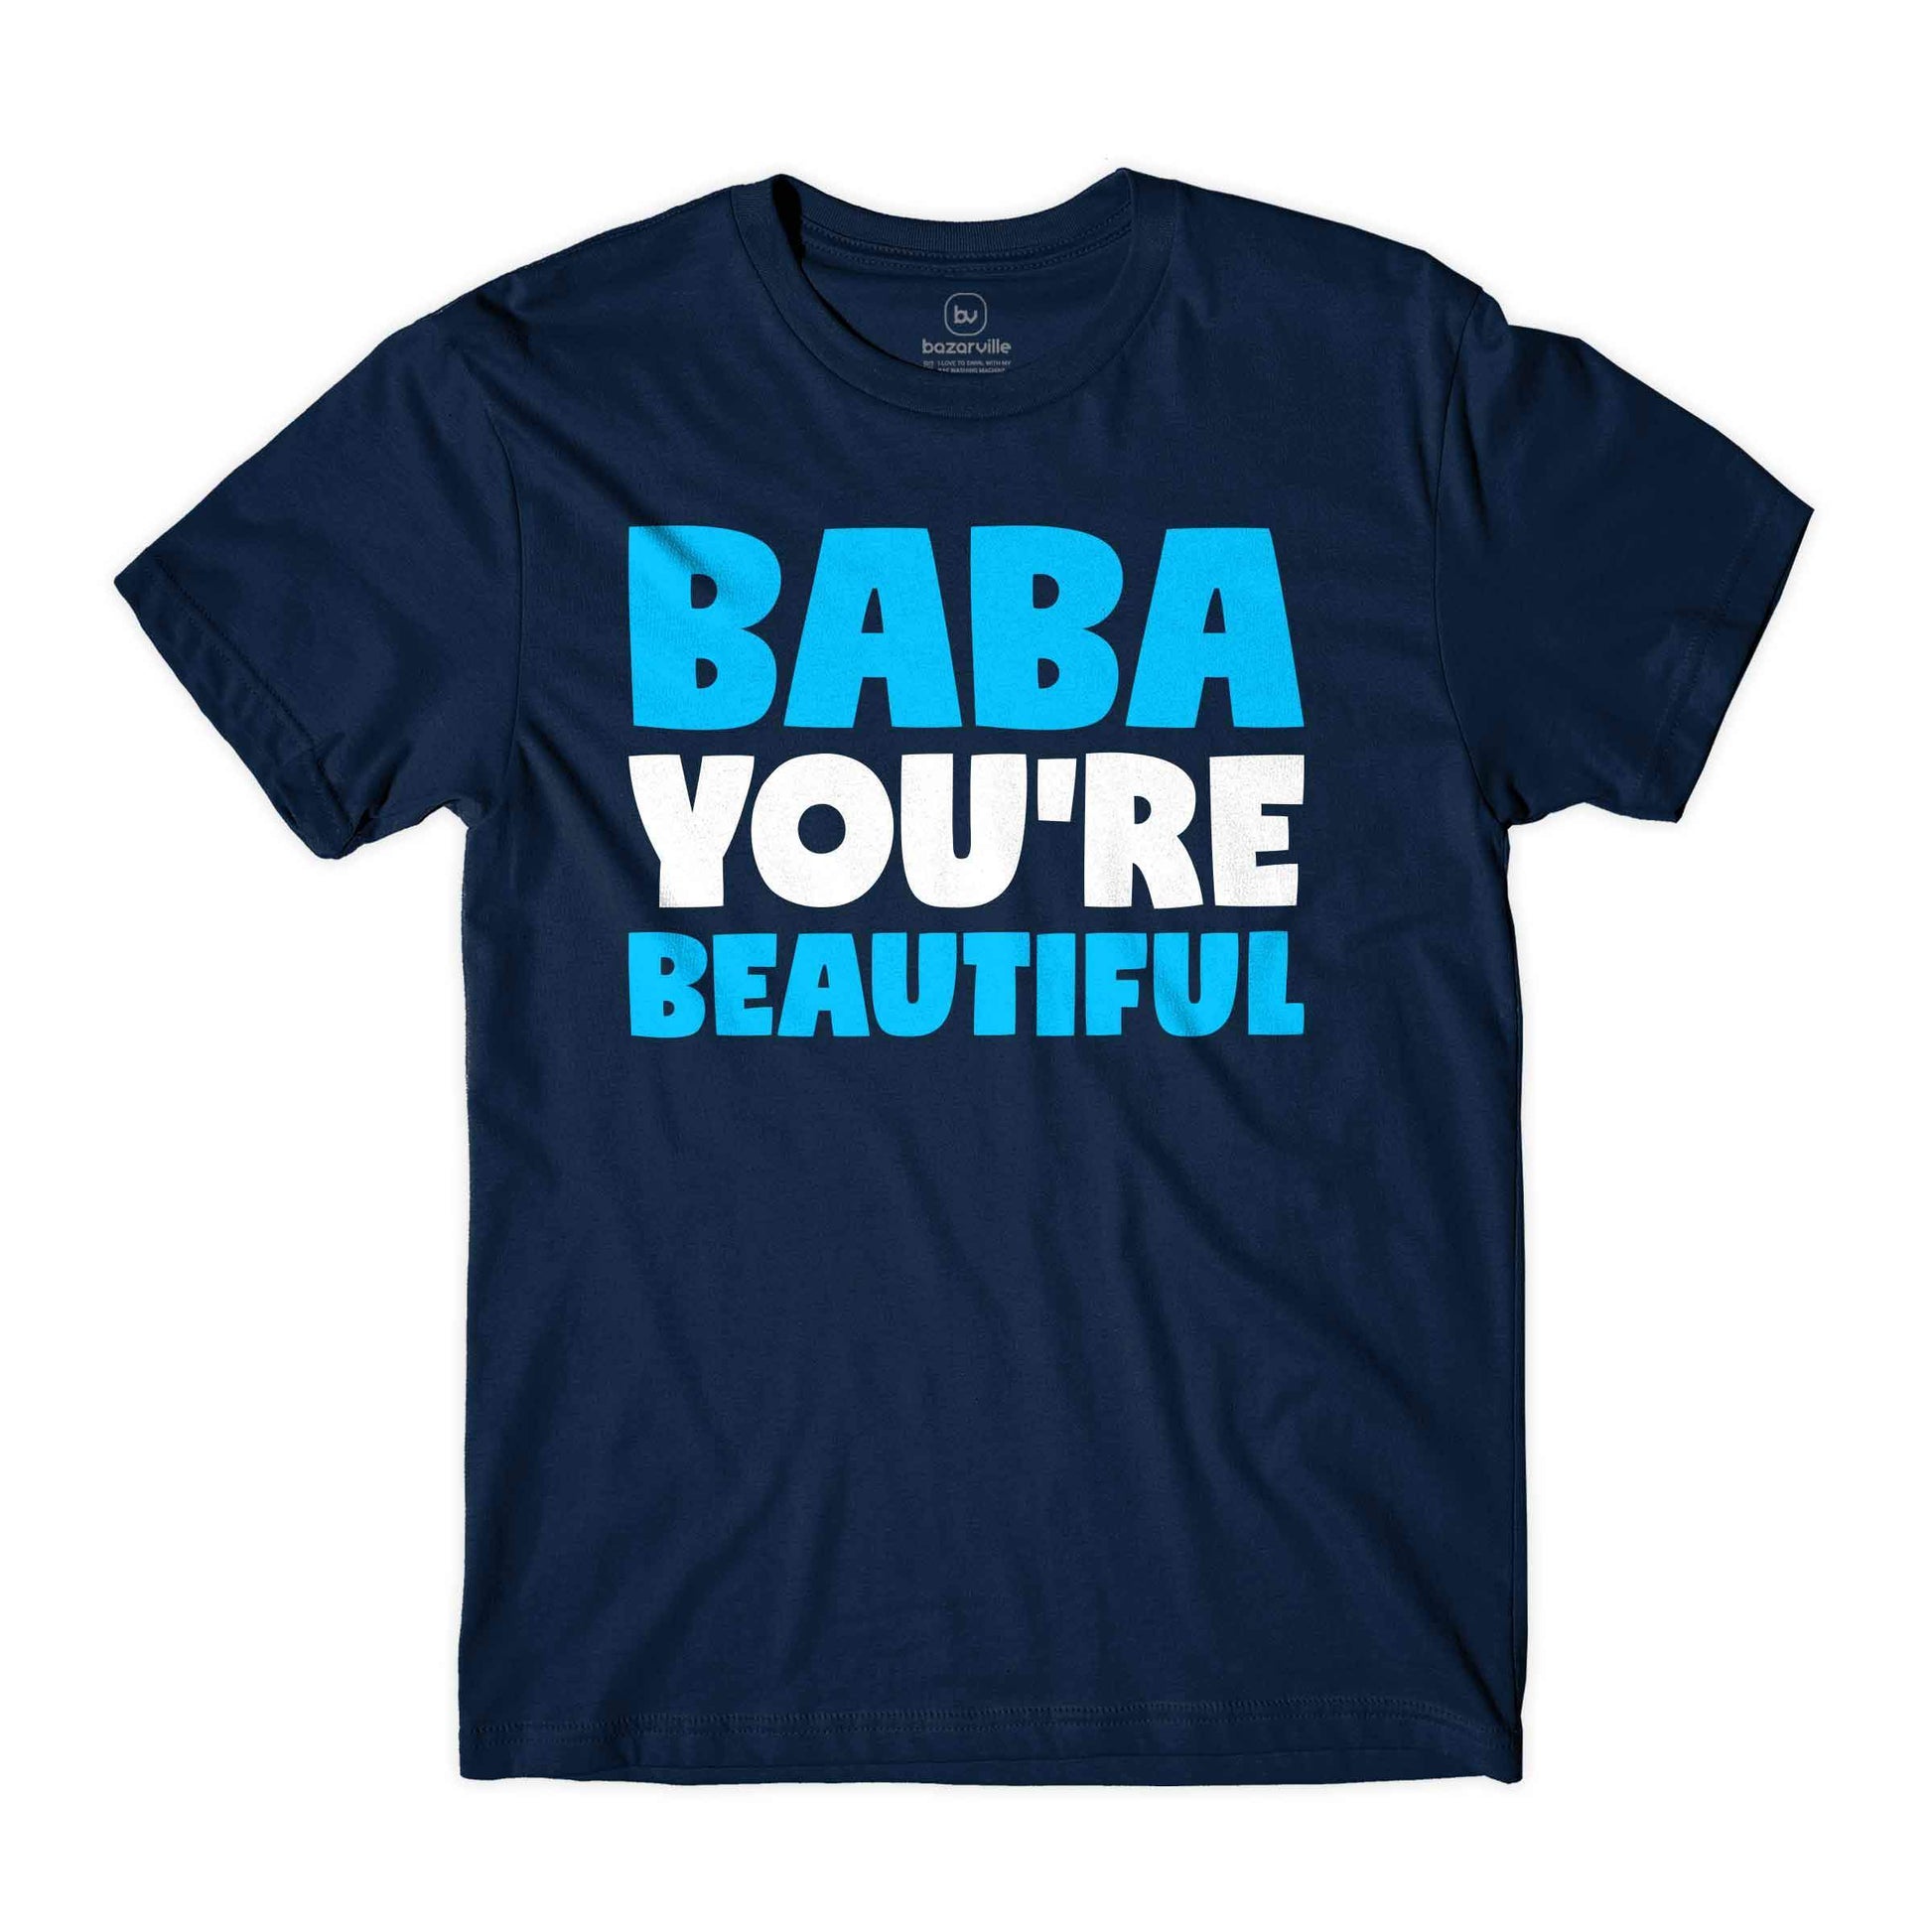 Bazarville XS / MEN / Navy Blue Baba You're Beautiful